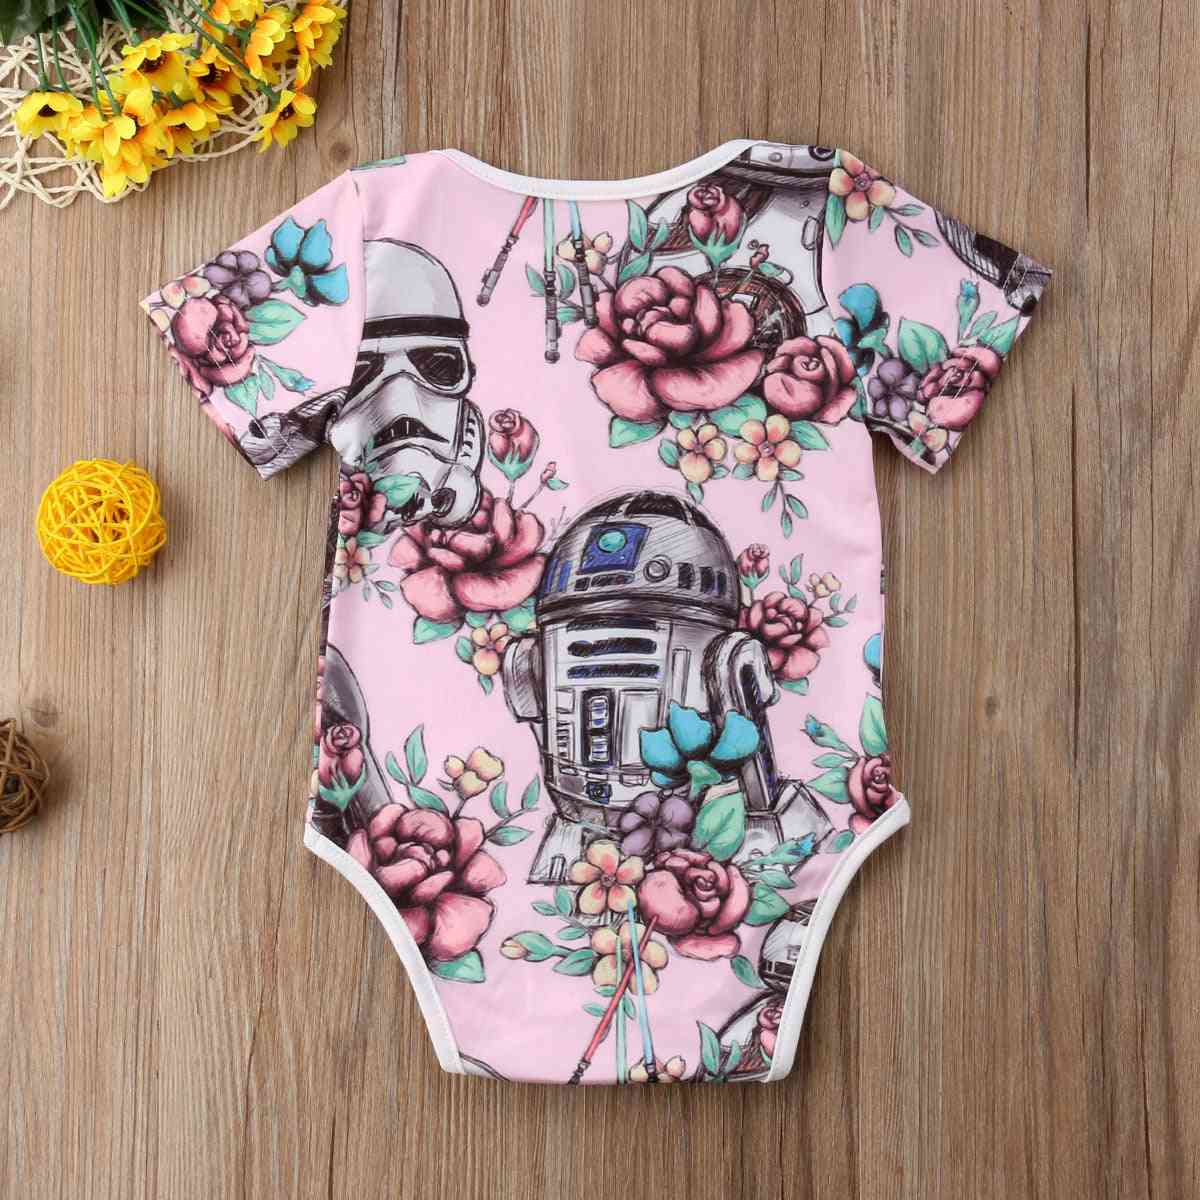 Summer Cute Newborn Baby Girl Clothes Bodysuit Short Sleeve Cotton Outfits Clothes